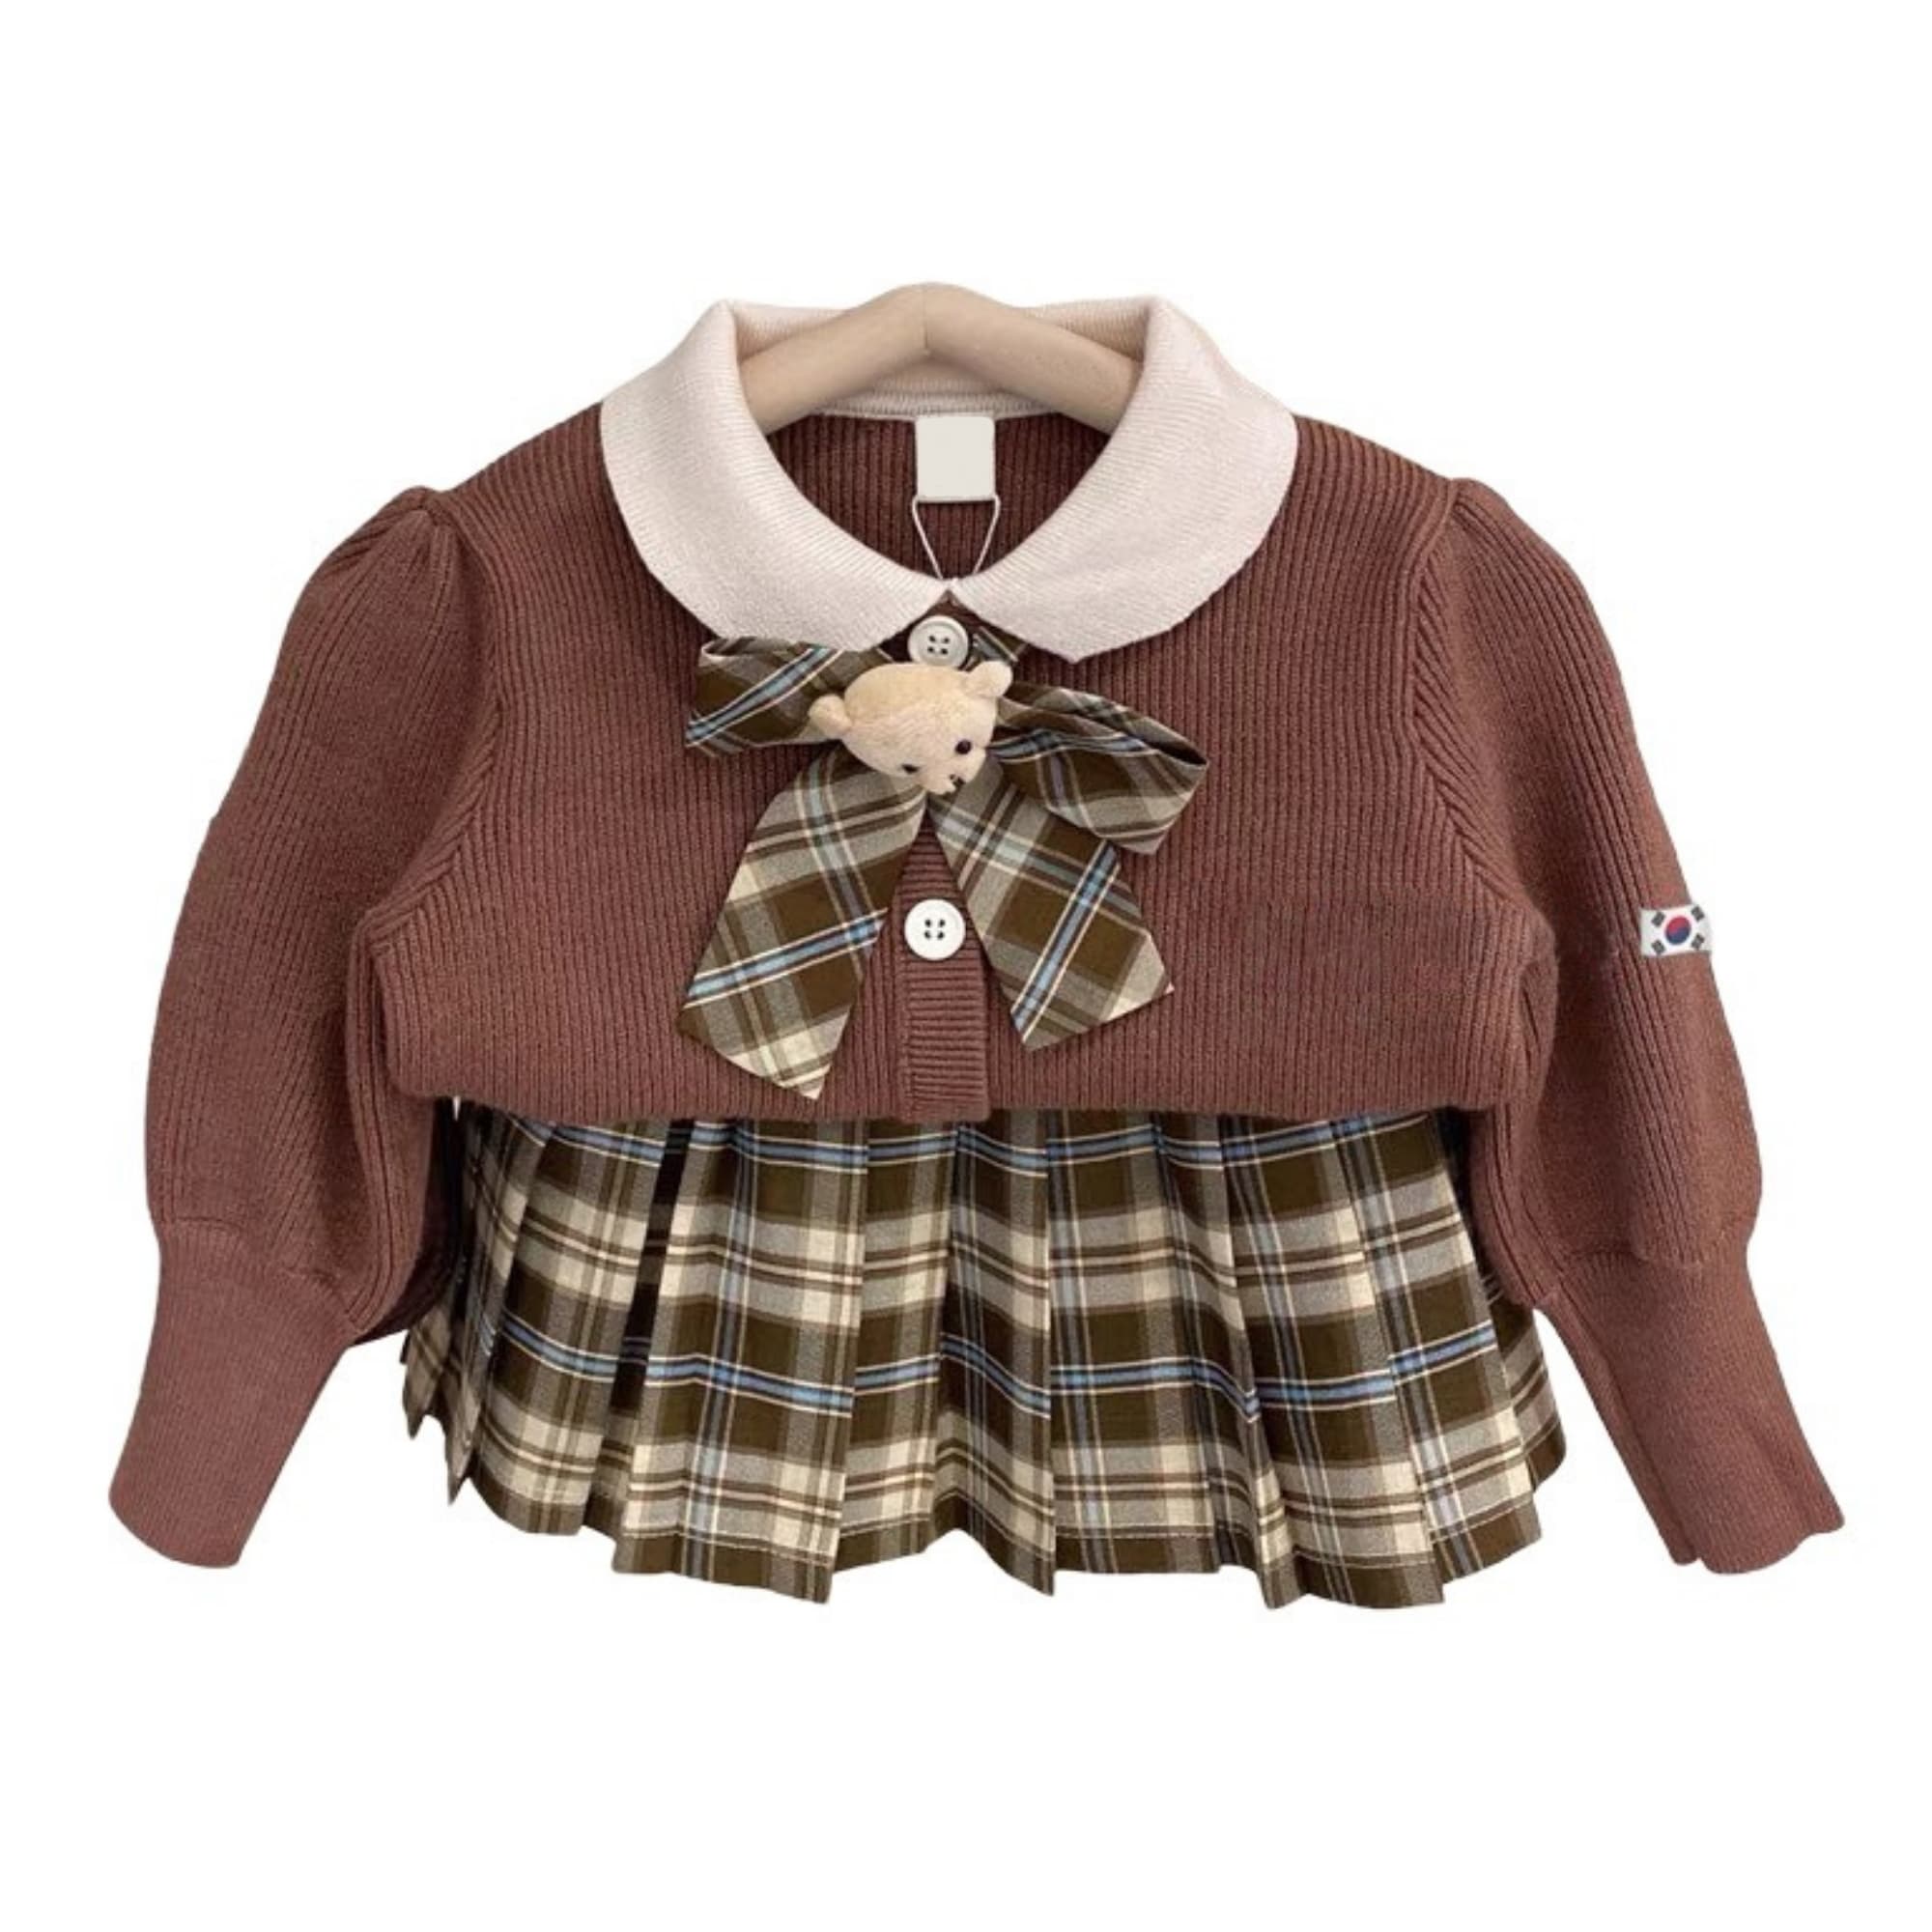 Kids Clothes Girls Customized Service 100% Wool Dresses New Arrival Each One In Opp Bag Made In Vietnam Manufacturer 3